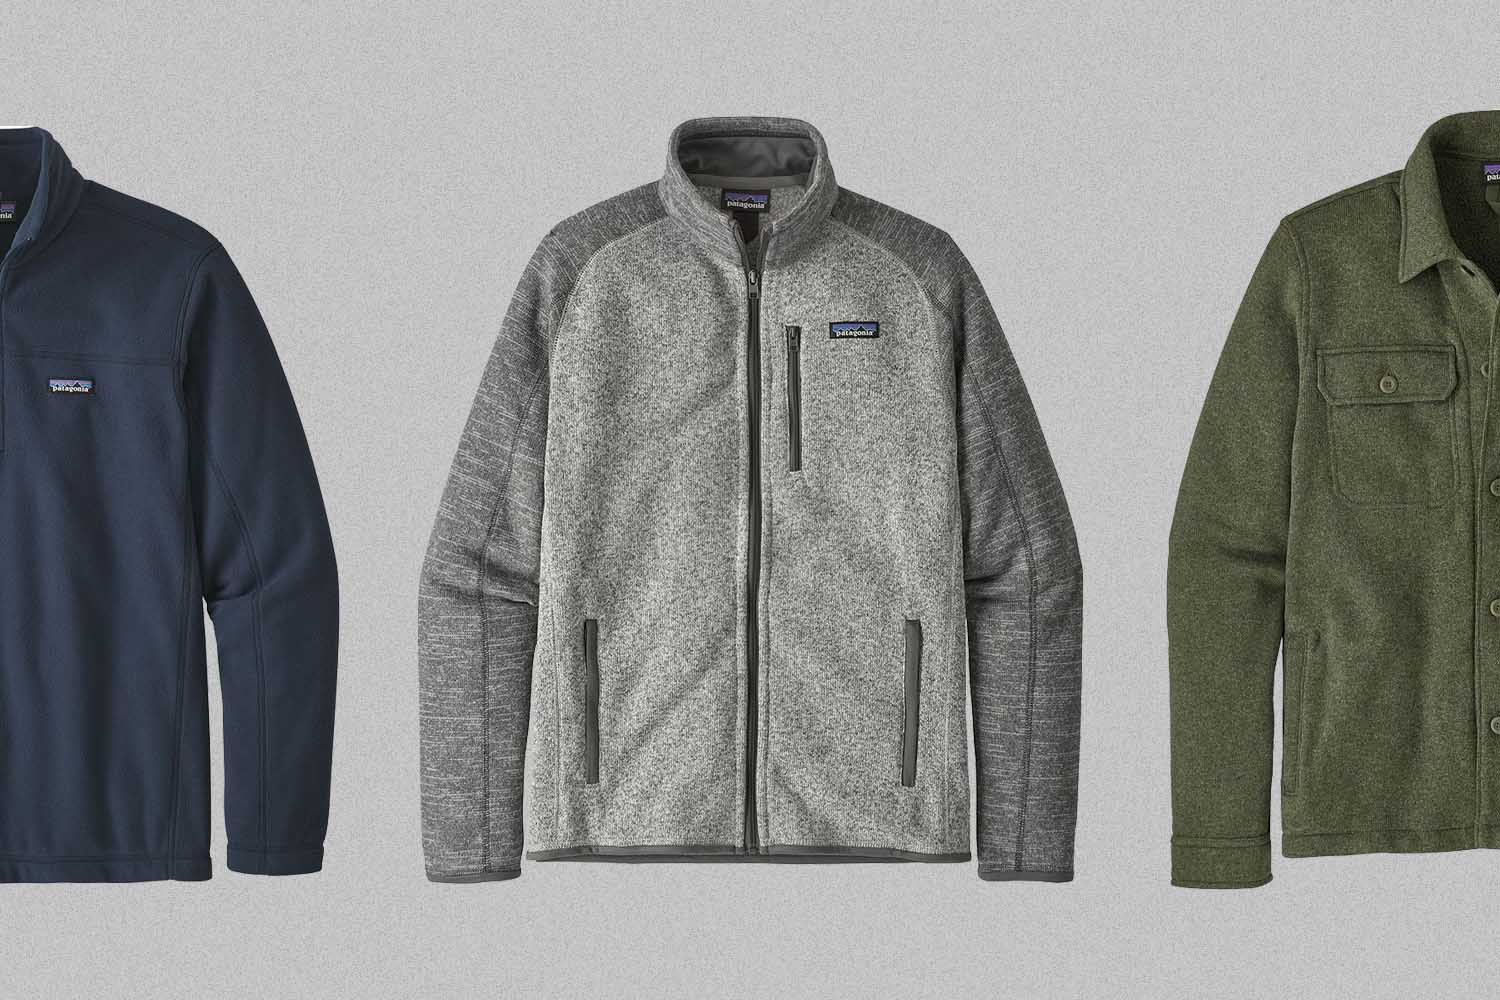 Deal: Patagonia Gear Is 30% Off at Backcountry